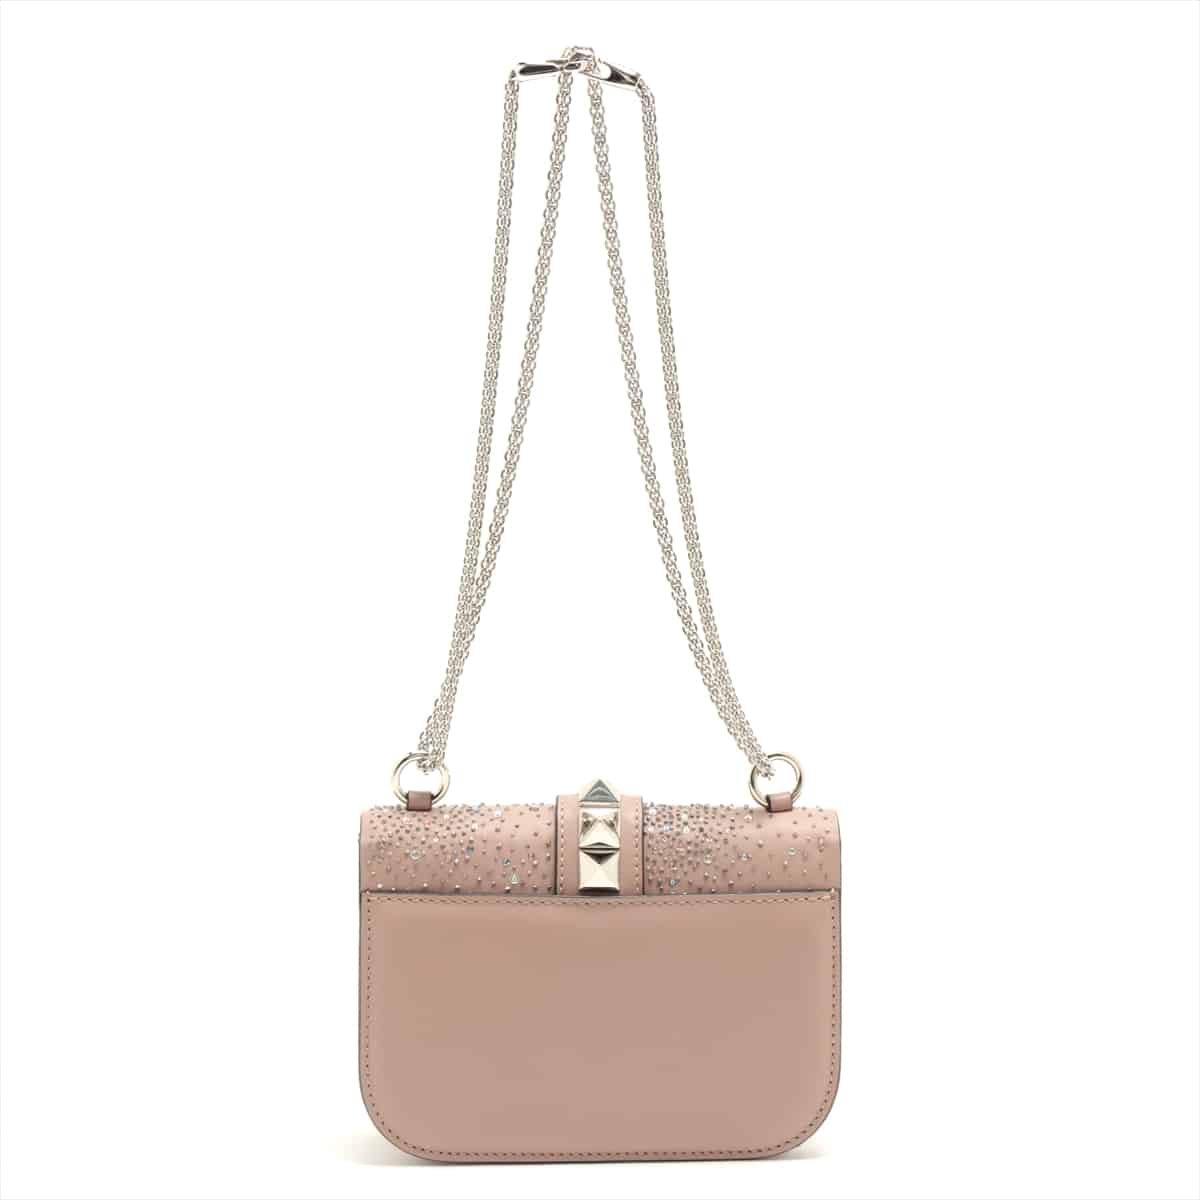 Valentino Garavani Leather x beads Chain shoulder bag Pink beige Surface beads can be removed